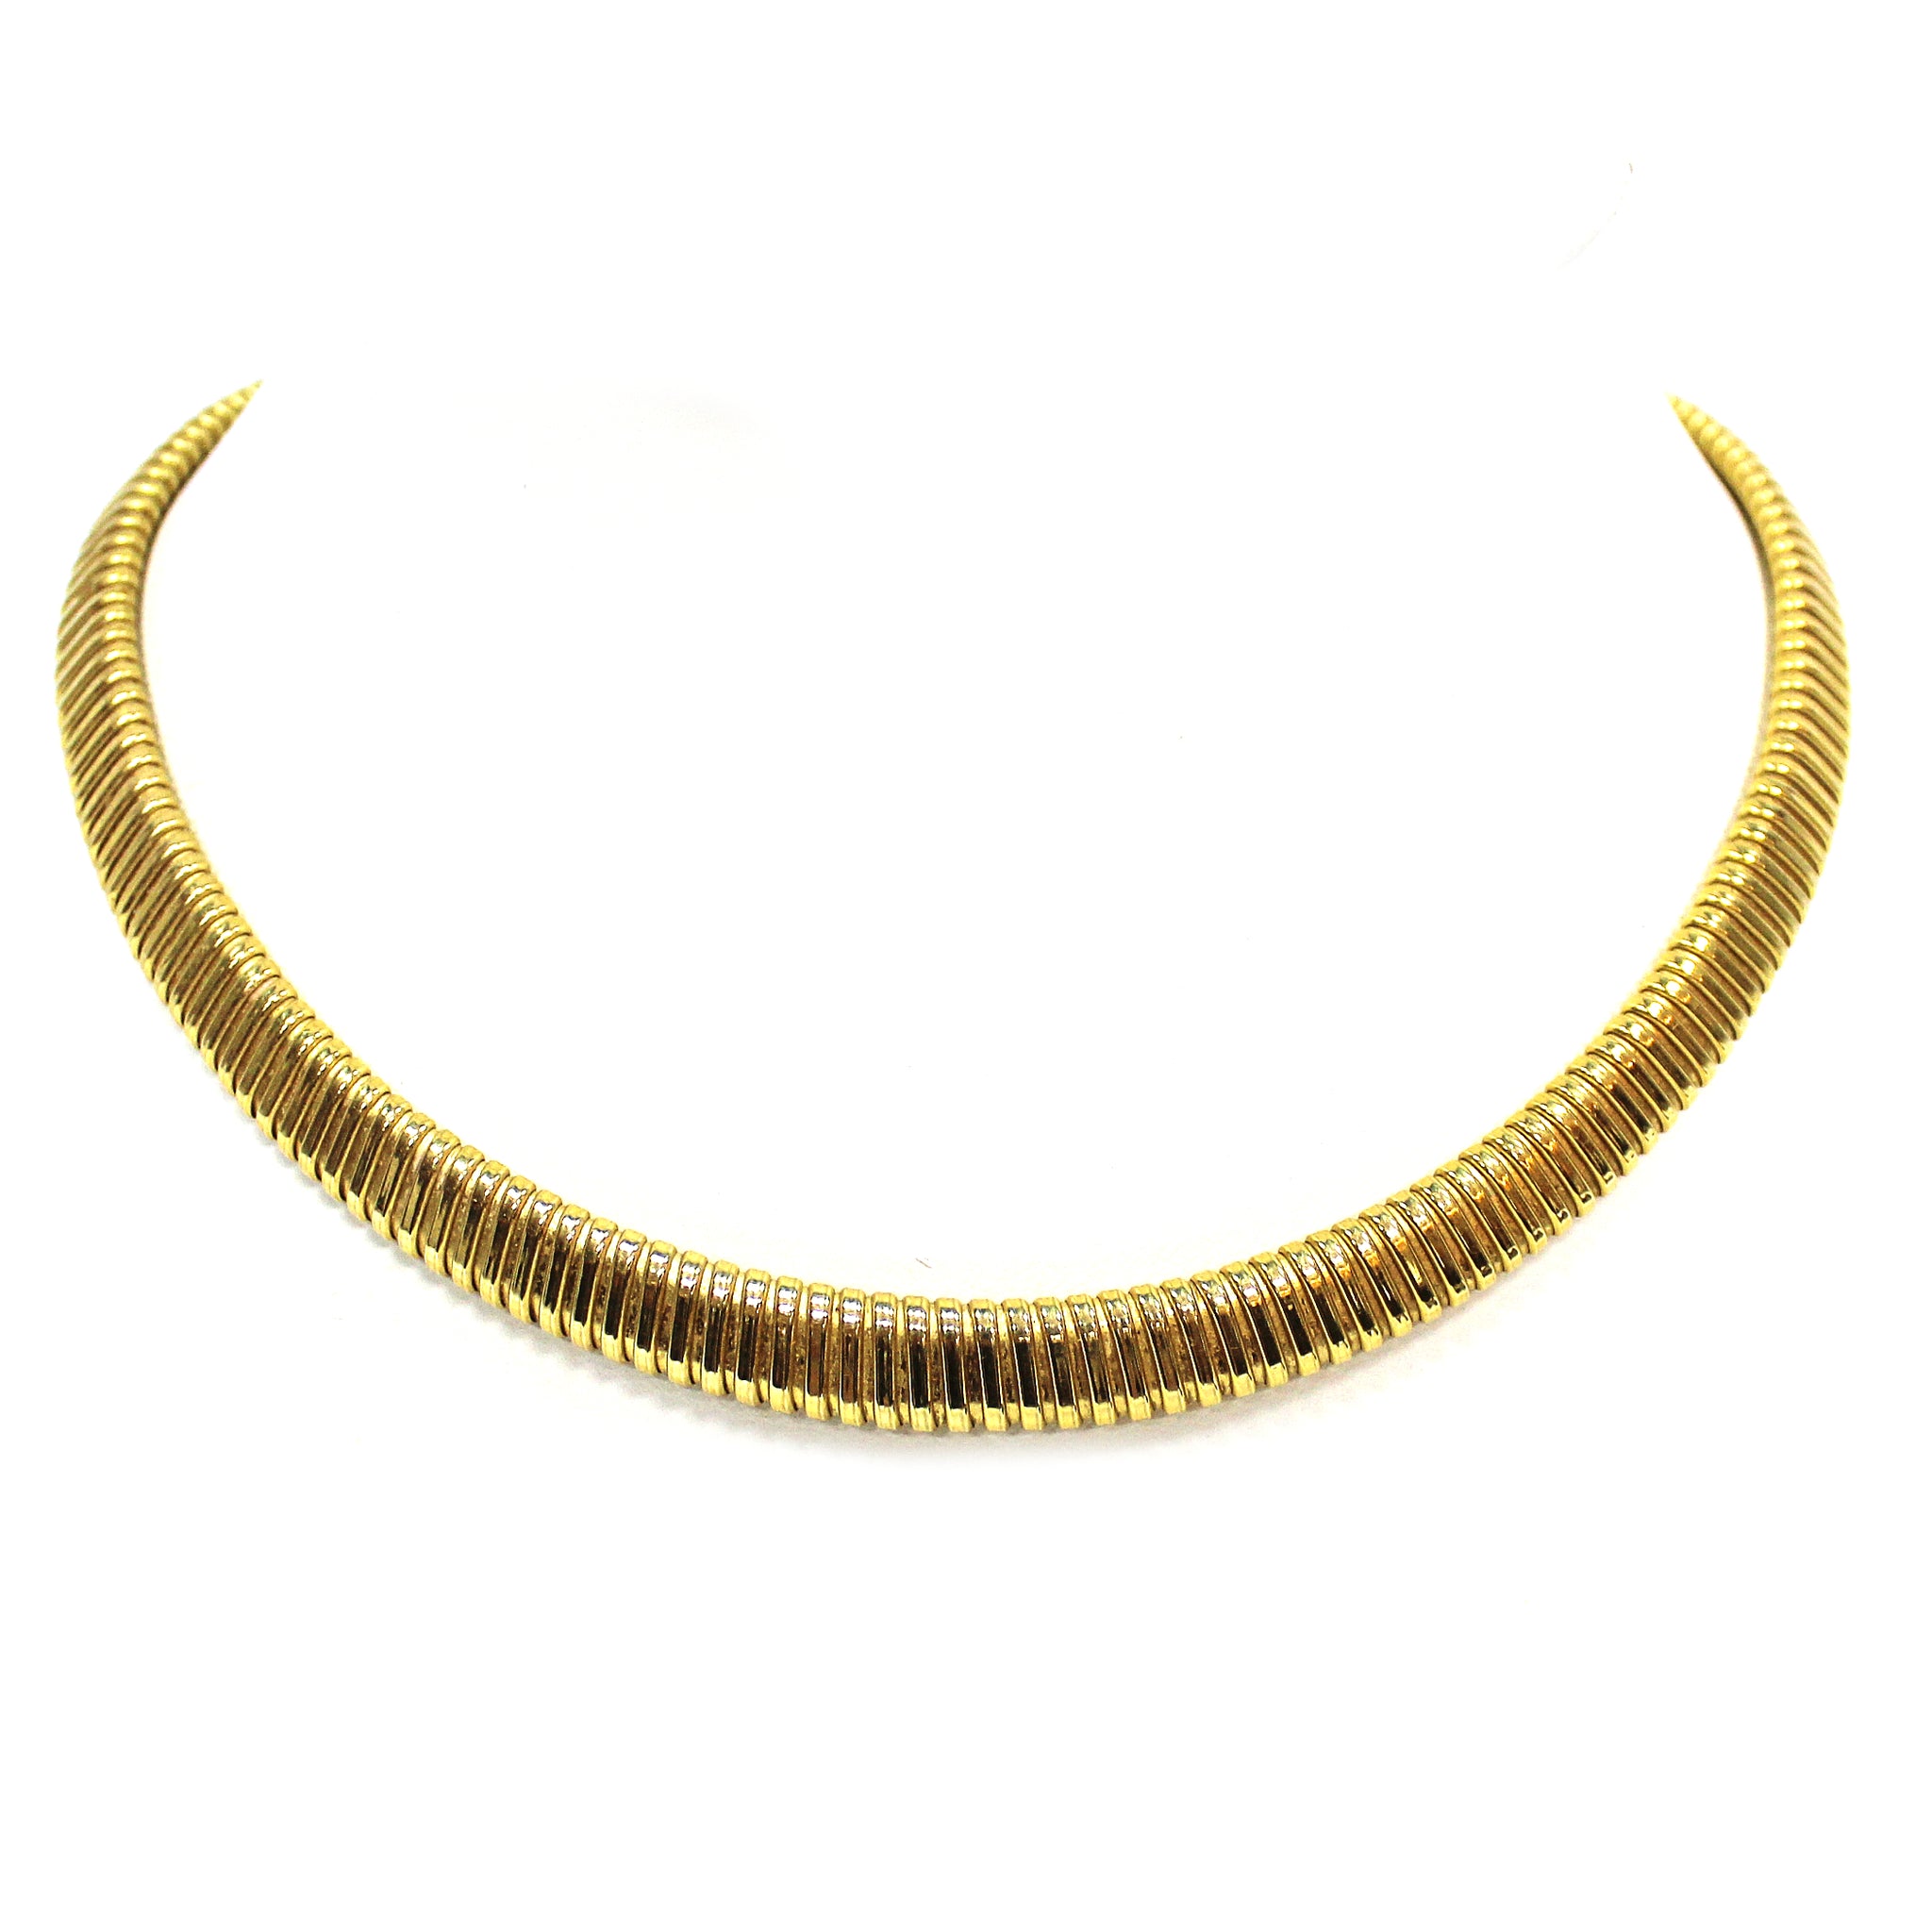 Vintage 18k Yellow Gold Tubogas Necklace